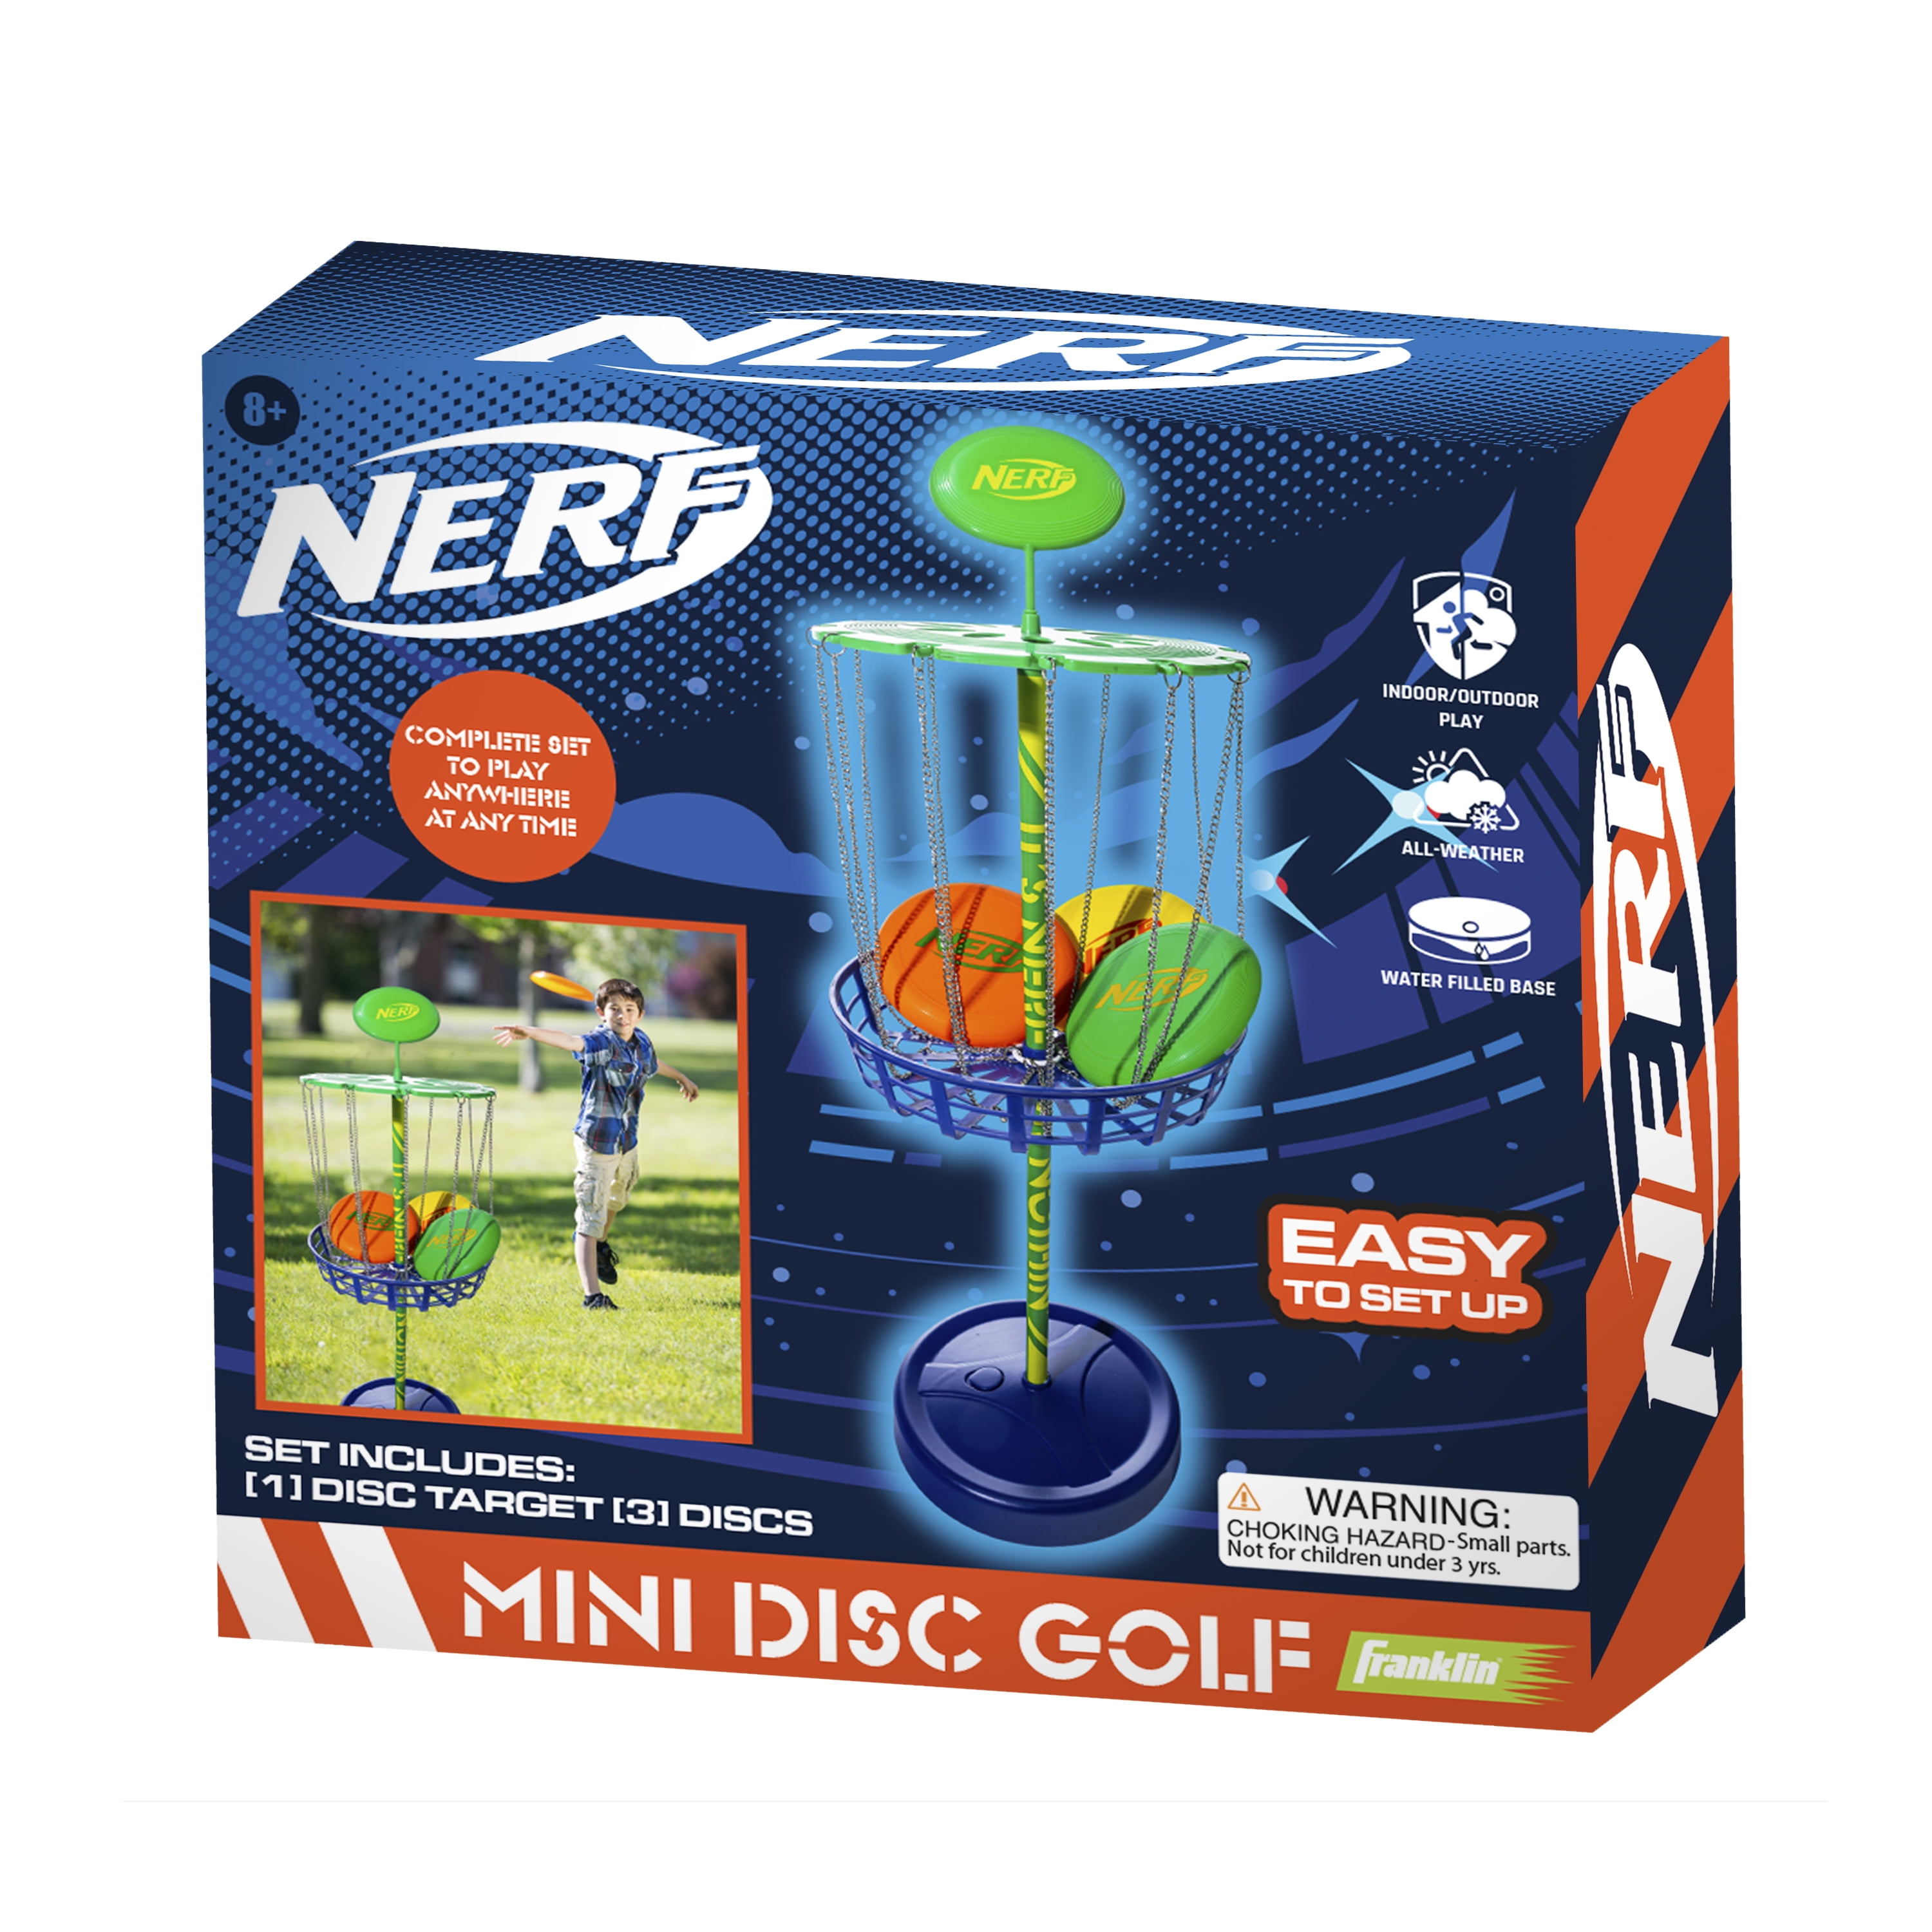 4-Player Portable Disc Golf Set Only $19.99 at ALDI